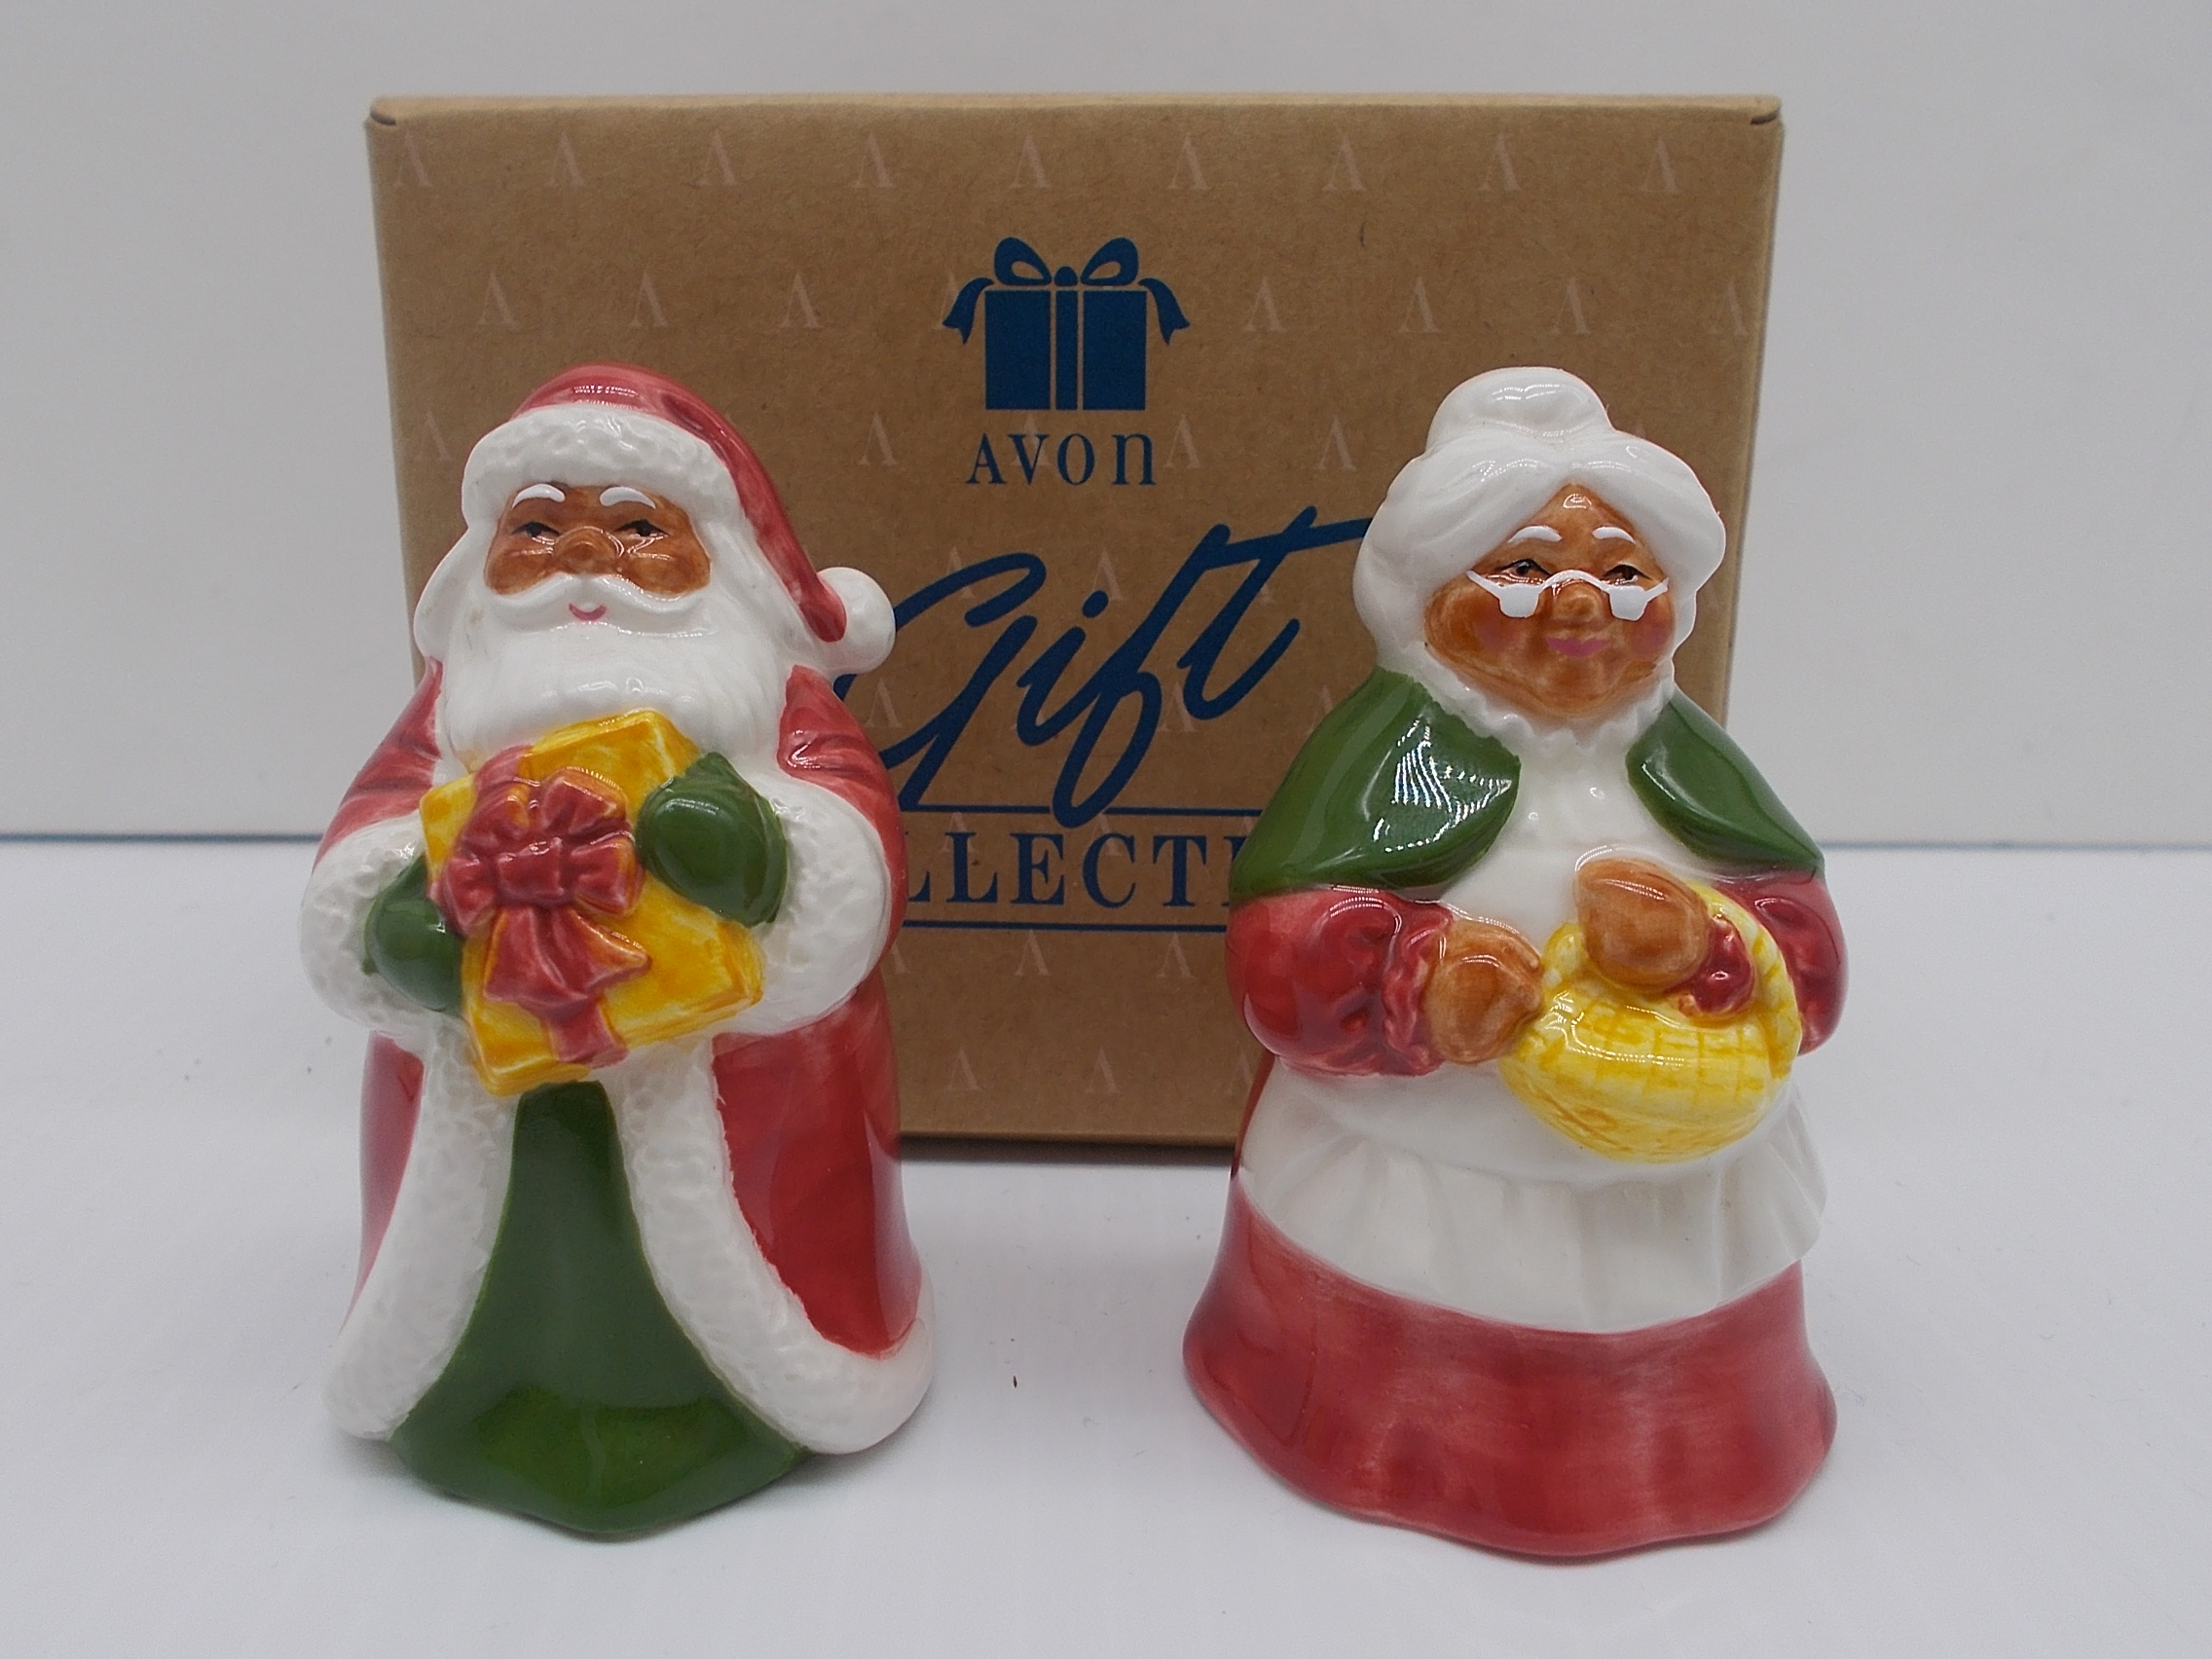 Details about    1999 HALLMARK FELIZ NAVIDAD SANTA WITH PACK OF CHILI PEPPERS  MINT IN BOX 